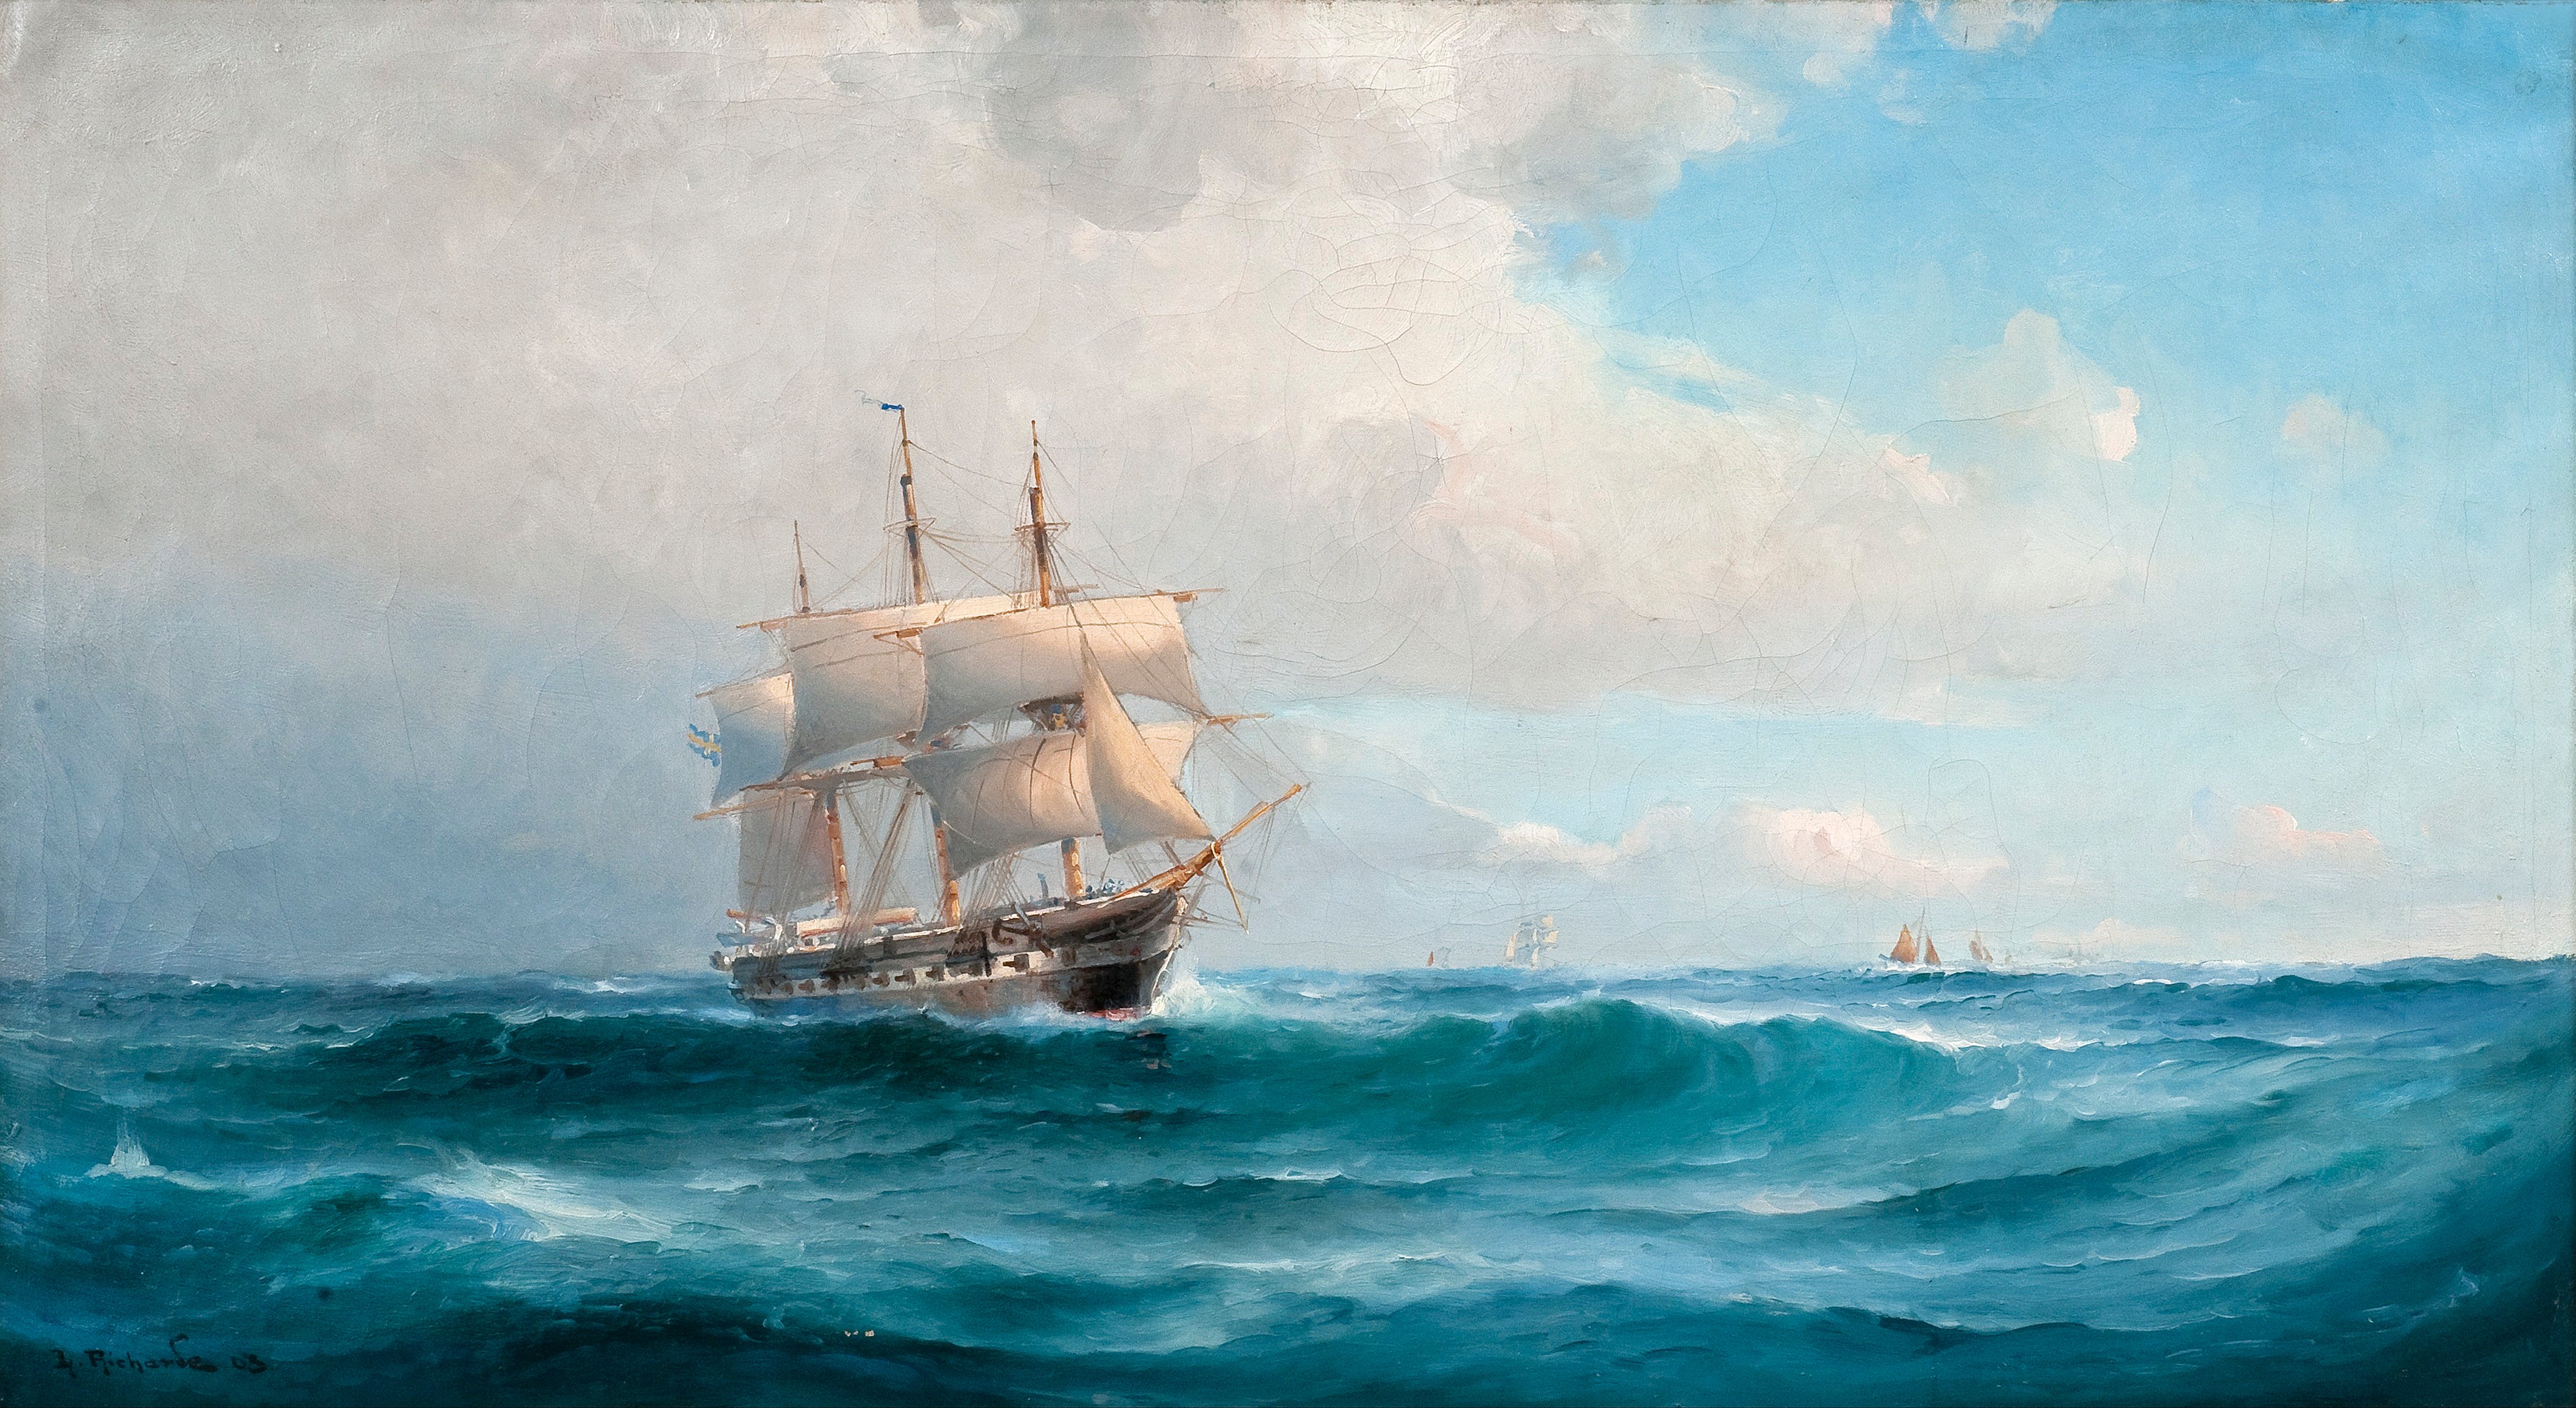 oil painting, painting, artistic, ship